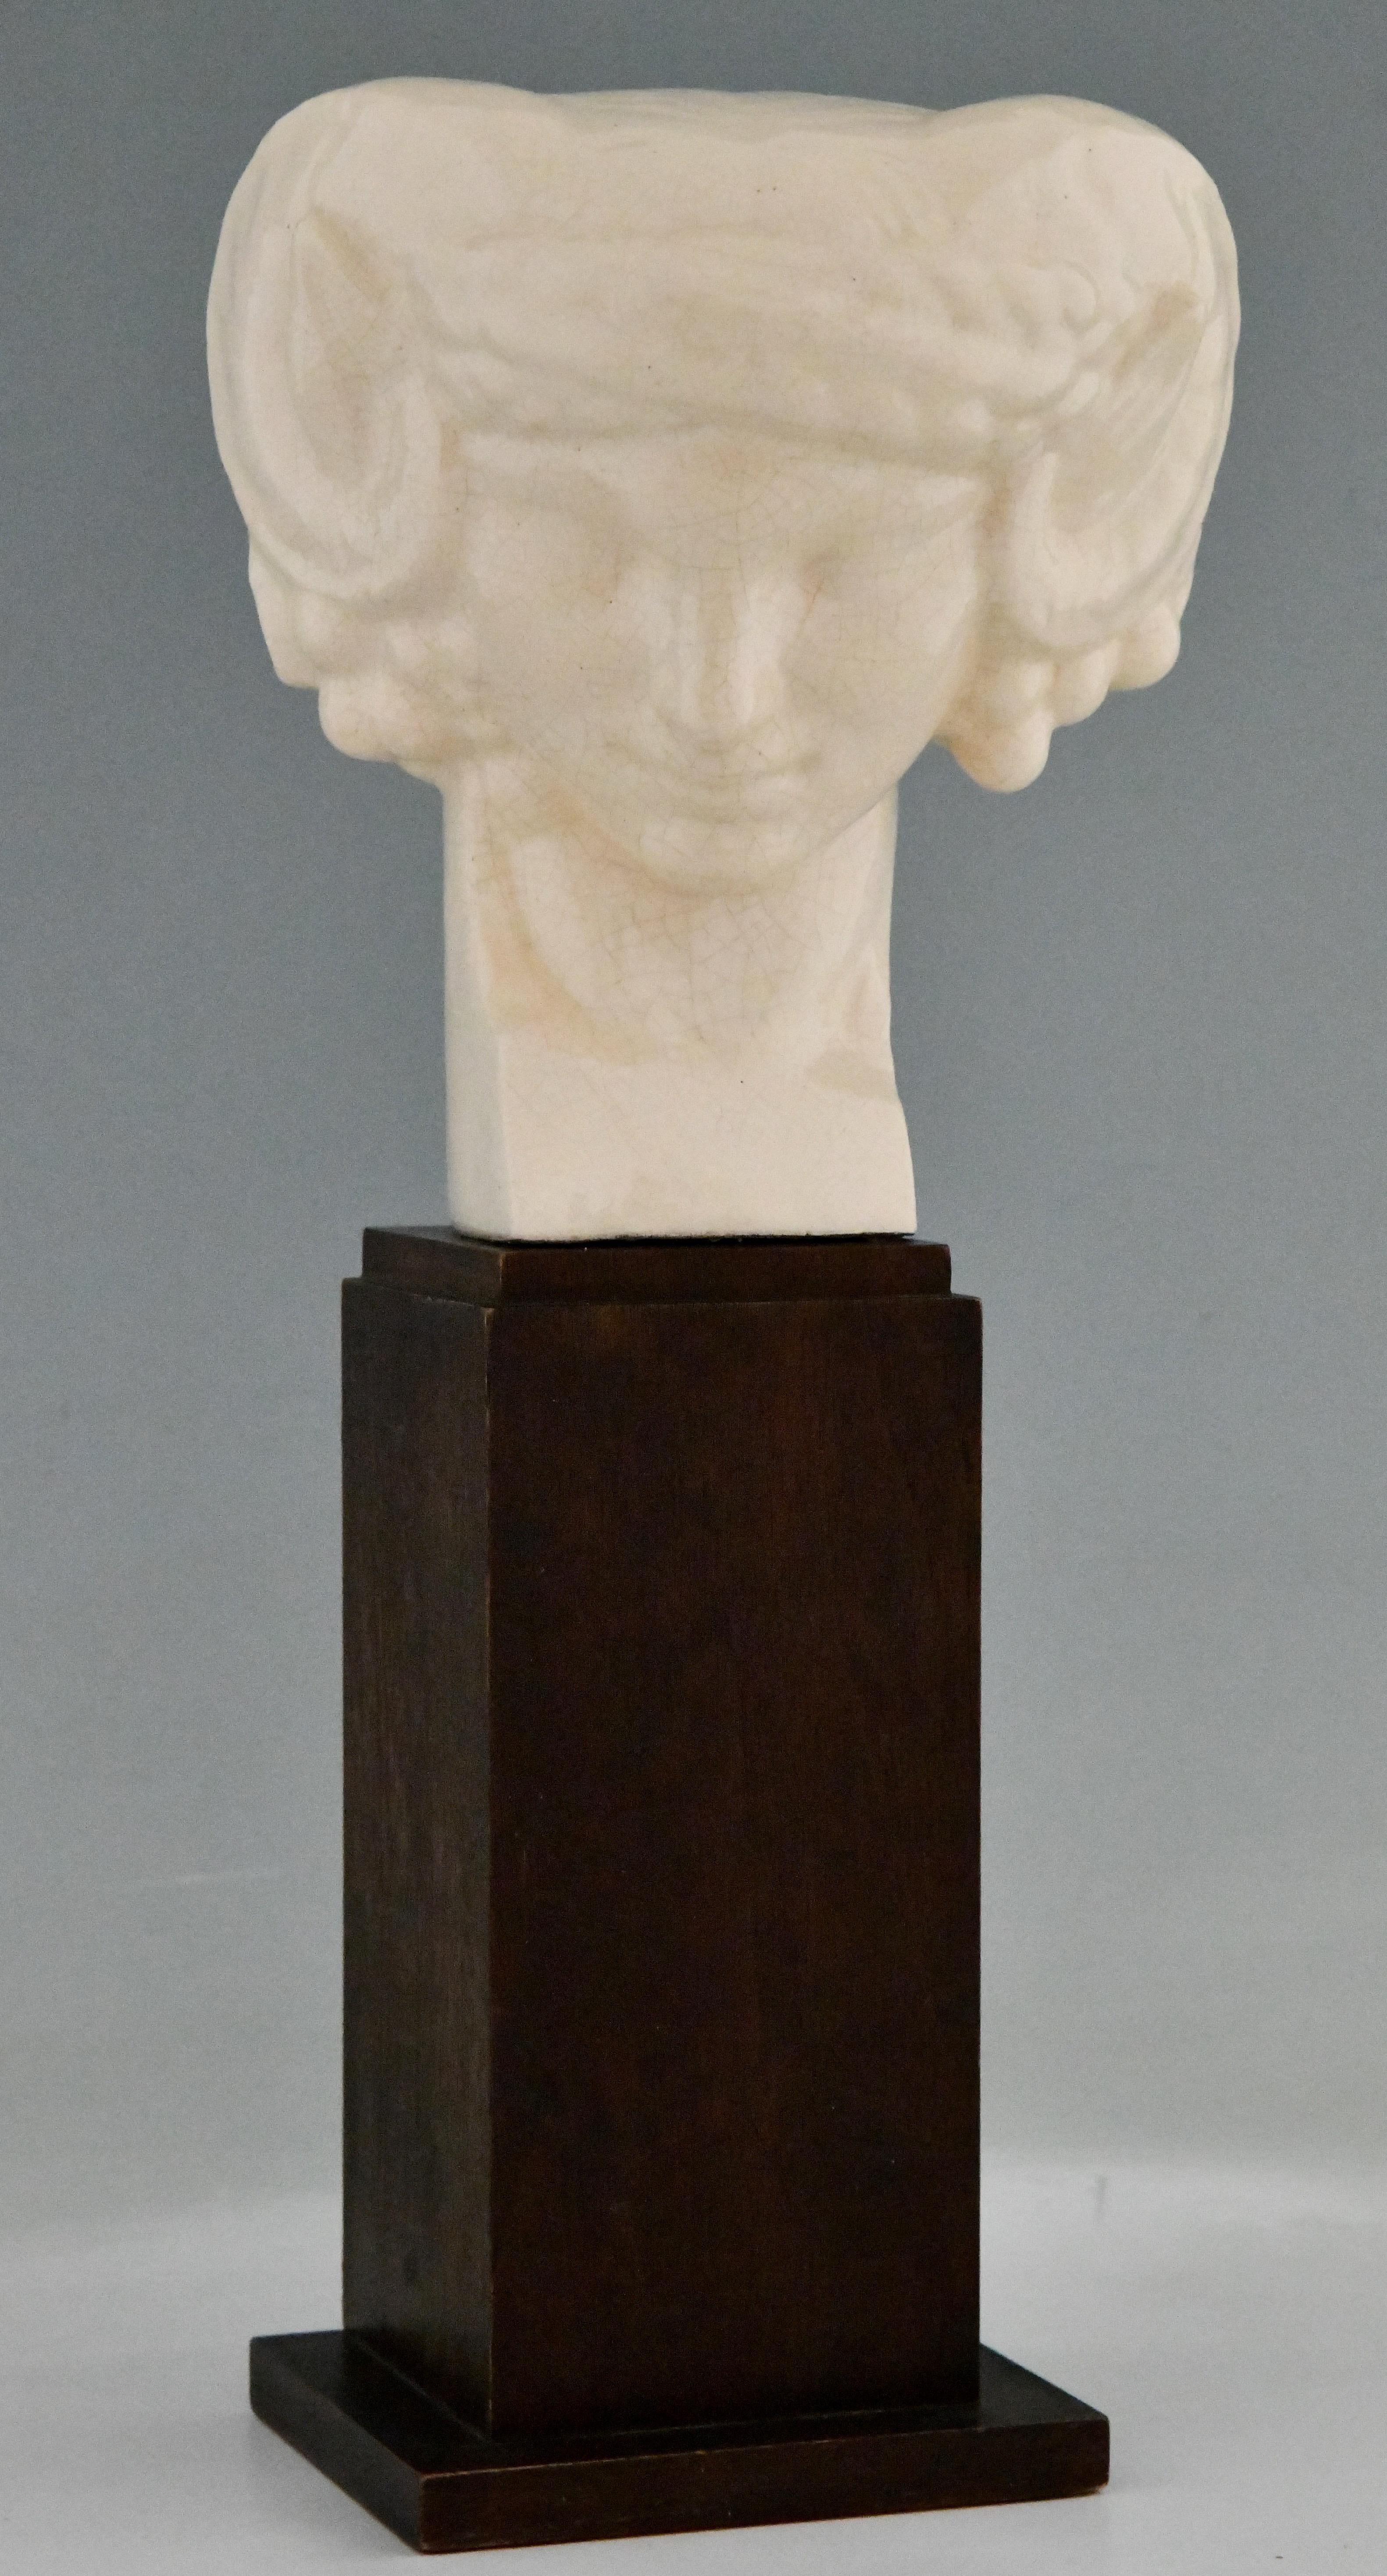 Art Deco ceramic craquelé bust of a faun signed by S. Foucault. On a wooden base. France 1925. Siméon Charles Joseph Foucault, known as Siméon Foucault (born May 3, 1884 in Nantes - died August 26, 1923 in Paris) was a French sculptor, he was